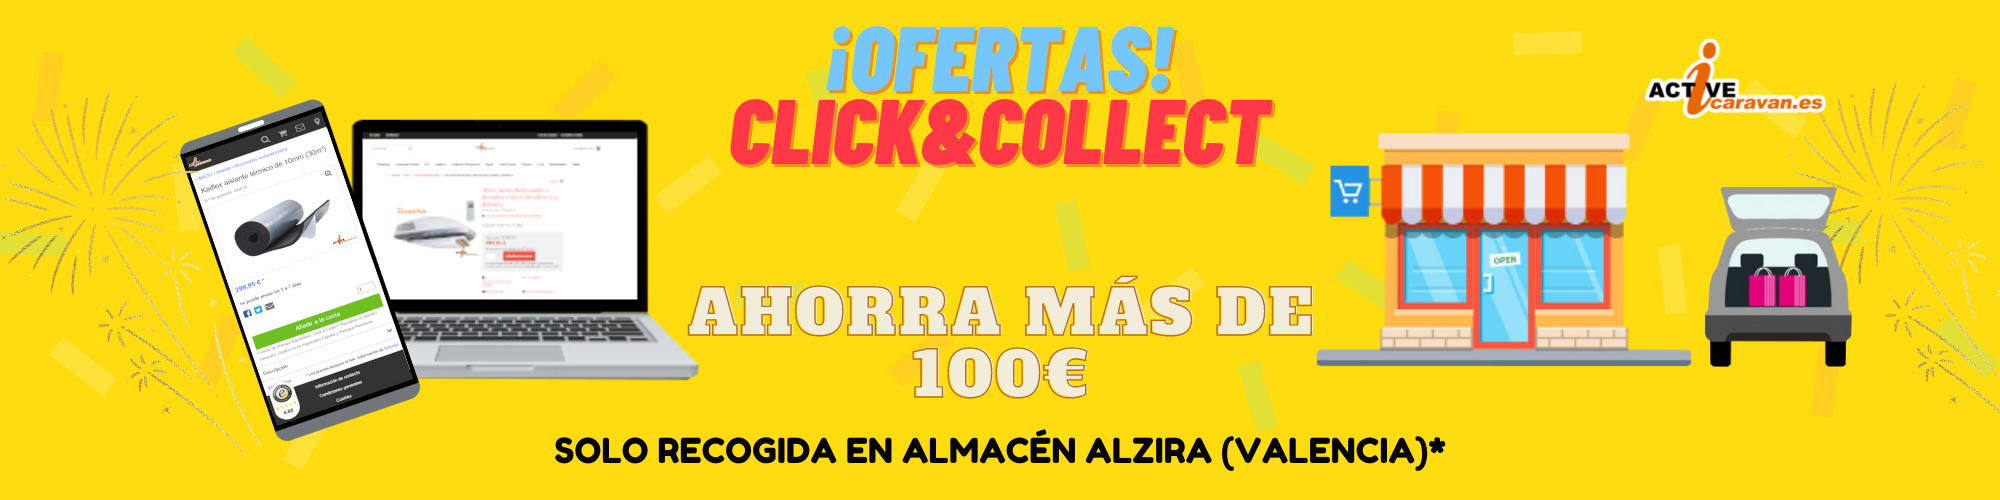 Click__Collect_1